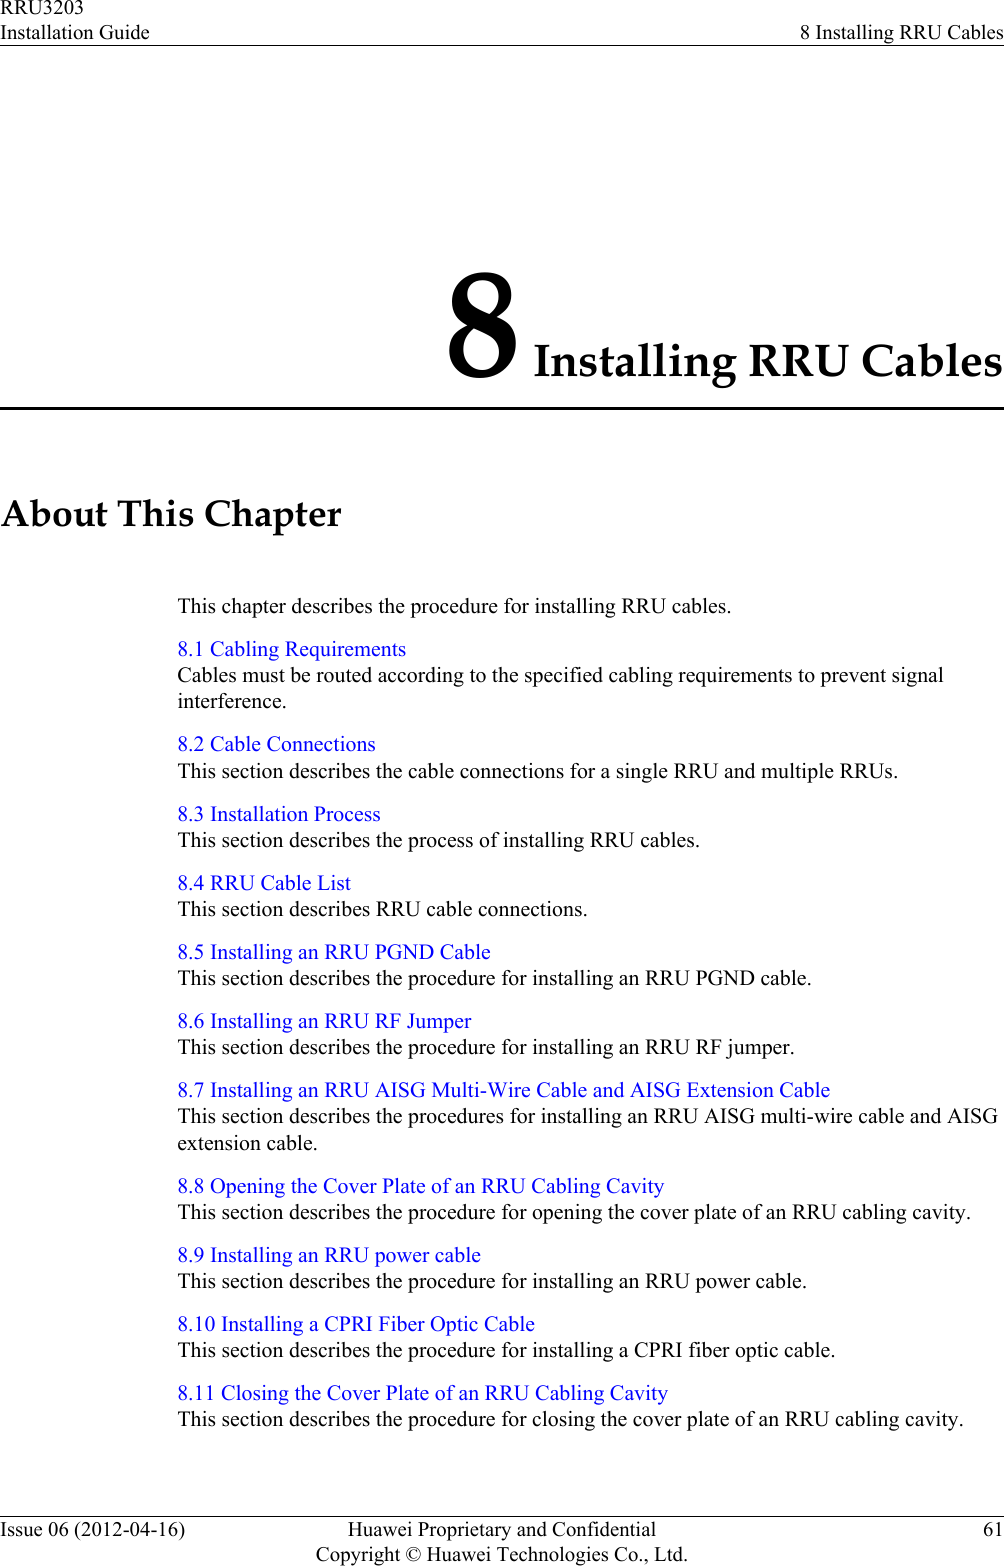 8 Installing RRU CablesAbout This ChapterThis chapter describes the procedure for installing RRU cables.8.1 Cabling RequirementsCables must be routed according to the specified cabling requirements to prevent signalinterference.8.2 Cable ConnectionsThis section describes the cable connections for a single RRU and multiple RRUs.8.3 Installation ProcessThis section describes the process of installing RRU cables.8.4 RRU Cable ListThis section describes RRU cable connections.8.5 Installing an RRU PGND CableThis section describes the procedure for installing an RRU PGND cable.8.6 Installing an RRU RF JumperThis section describes the procedure for installing an RRU RF jumper.8.7 Installing an RRU AISG Multi-Wire Cable and AISG Extension CableThis section describes the procedures for installing an RRU AISG multi-wire cable and AISGextension cable.8.8 Opening the Cover Plate of an RRU Cabling CavityThis section describes the procedure for opening the cover plate of an RRU cabling cavity.8.9 Installing an RRU power cableThis section describes the procedure for installing an RRU power cable.8.10 Installing a CPRI Fiber Optic CableThis section describes the procedure for installing a CPRI fiber optic cable.8.11 Closing the Cover Plate of an RRU Cabling CavityThis section describes the procedure for closing the cover plate of an RRU cabling cavity.RRU3203Installation Guide 8 Installing RRU CablesIssue 06 (2012-04-16) Huawei Proprietary and ConfidentialCopyright © Huawei Technologies Co., Ltd.61